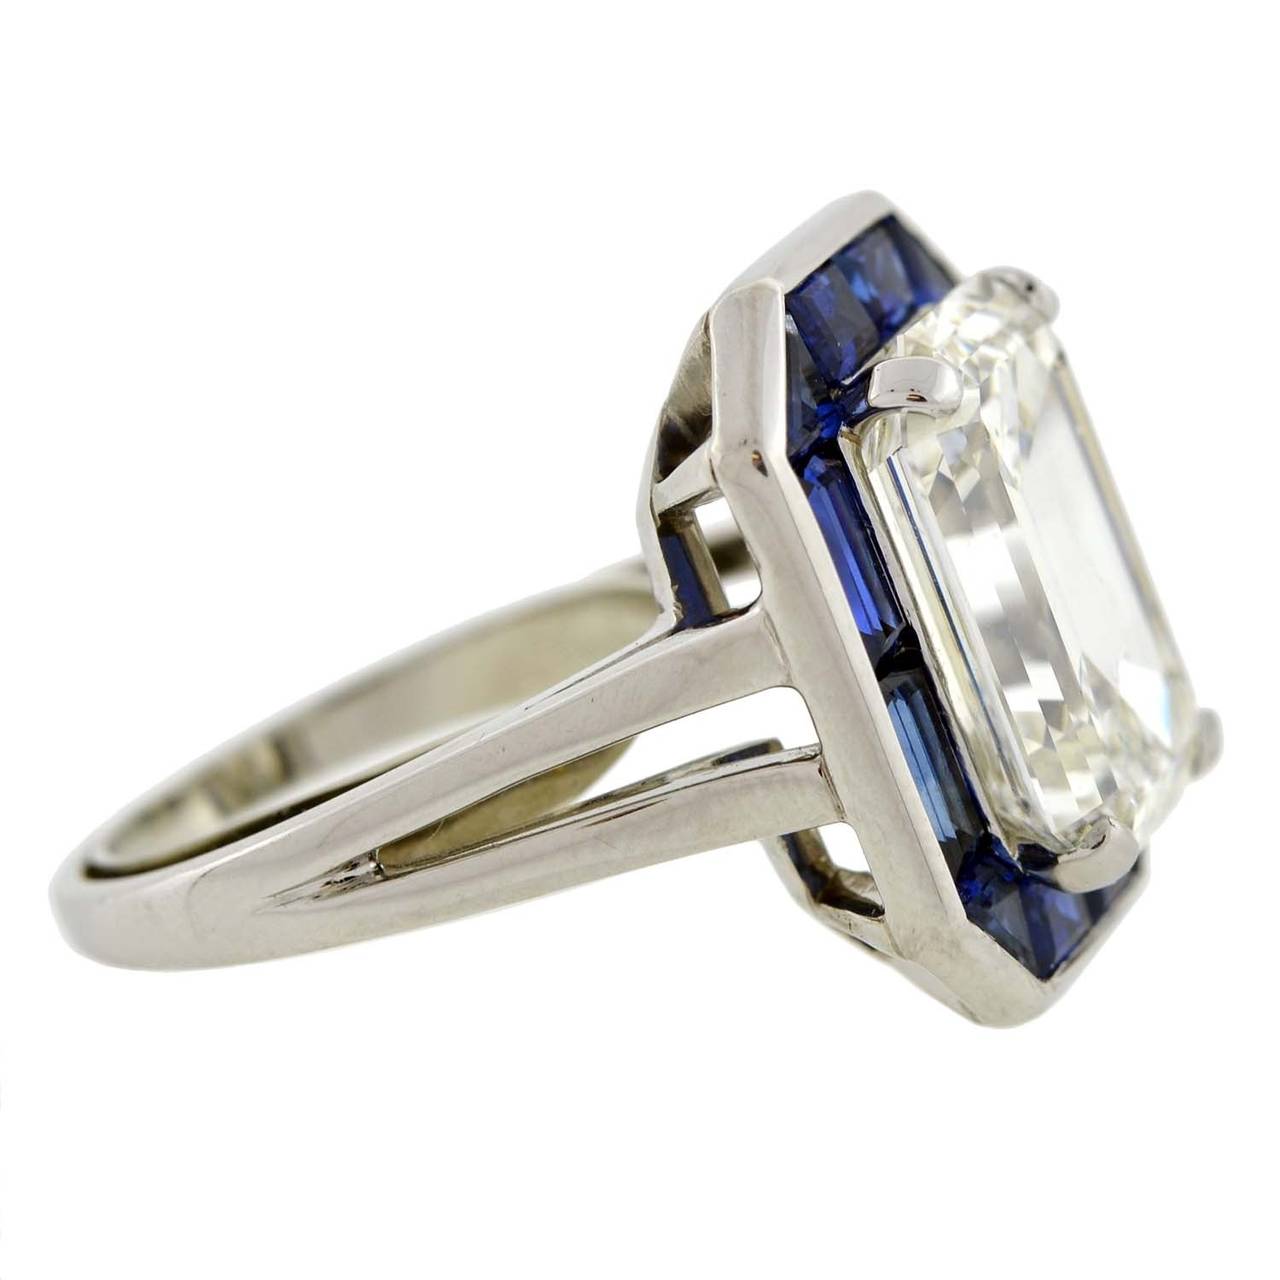 This Oscar Heyman estate ring from the 1980s is a breathtaking beauty of magnificent proportions! A spectacular 8.38ct Emerald Cut diamond is prong set within the platinum mounting. Surrounding the diamond is a border of vivid sapphires, which